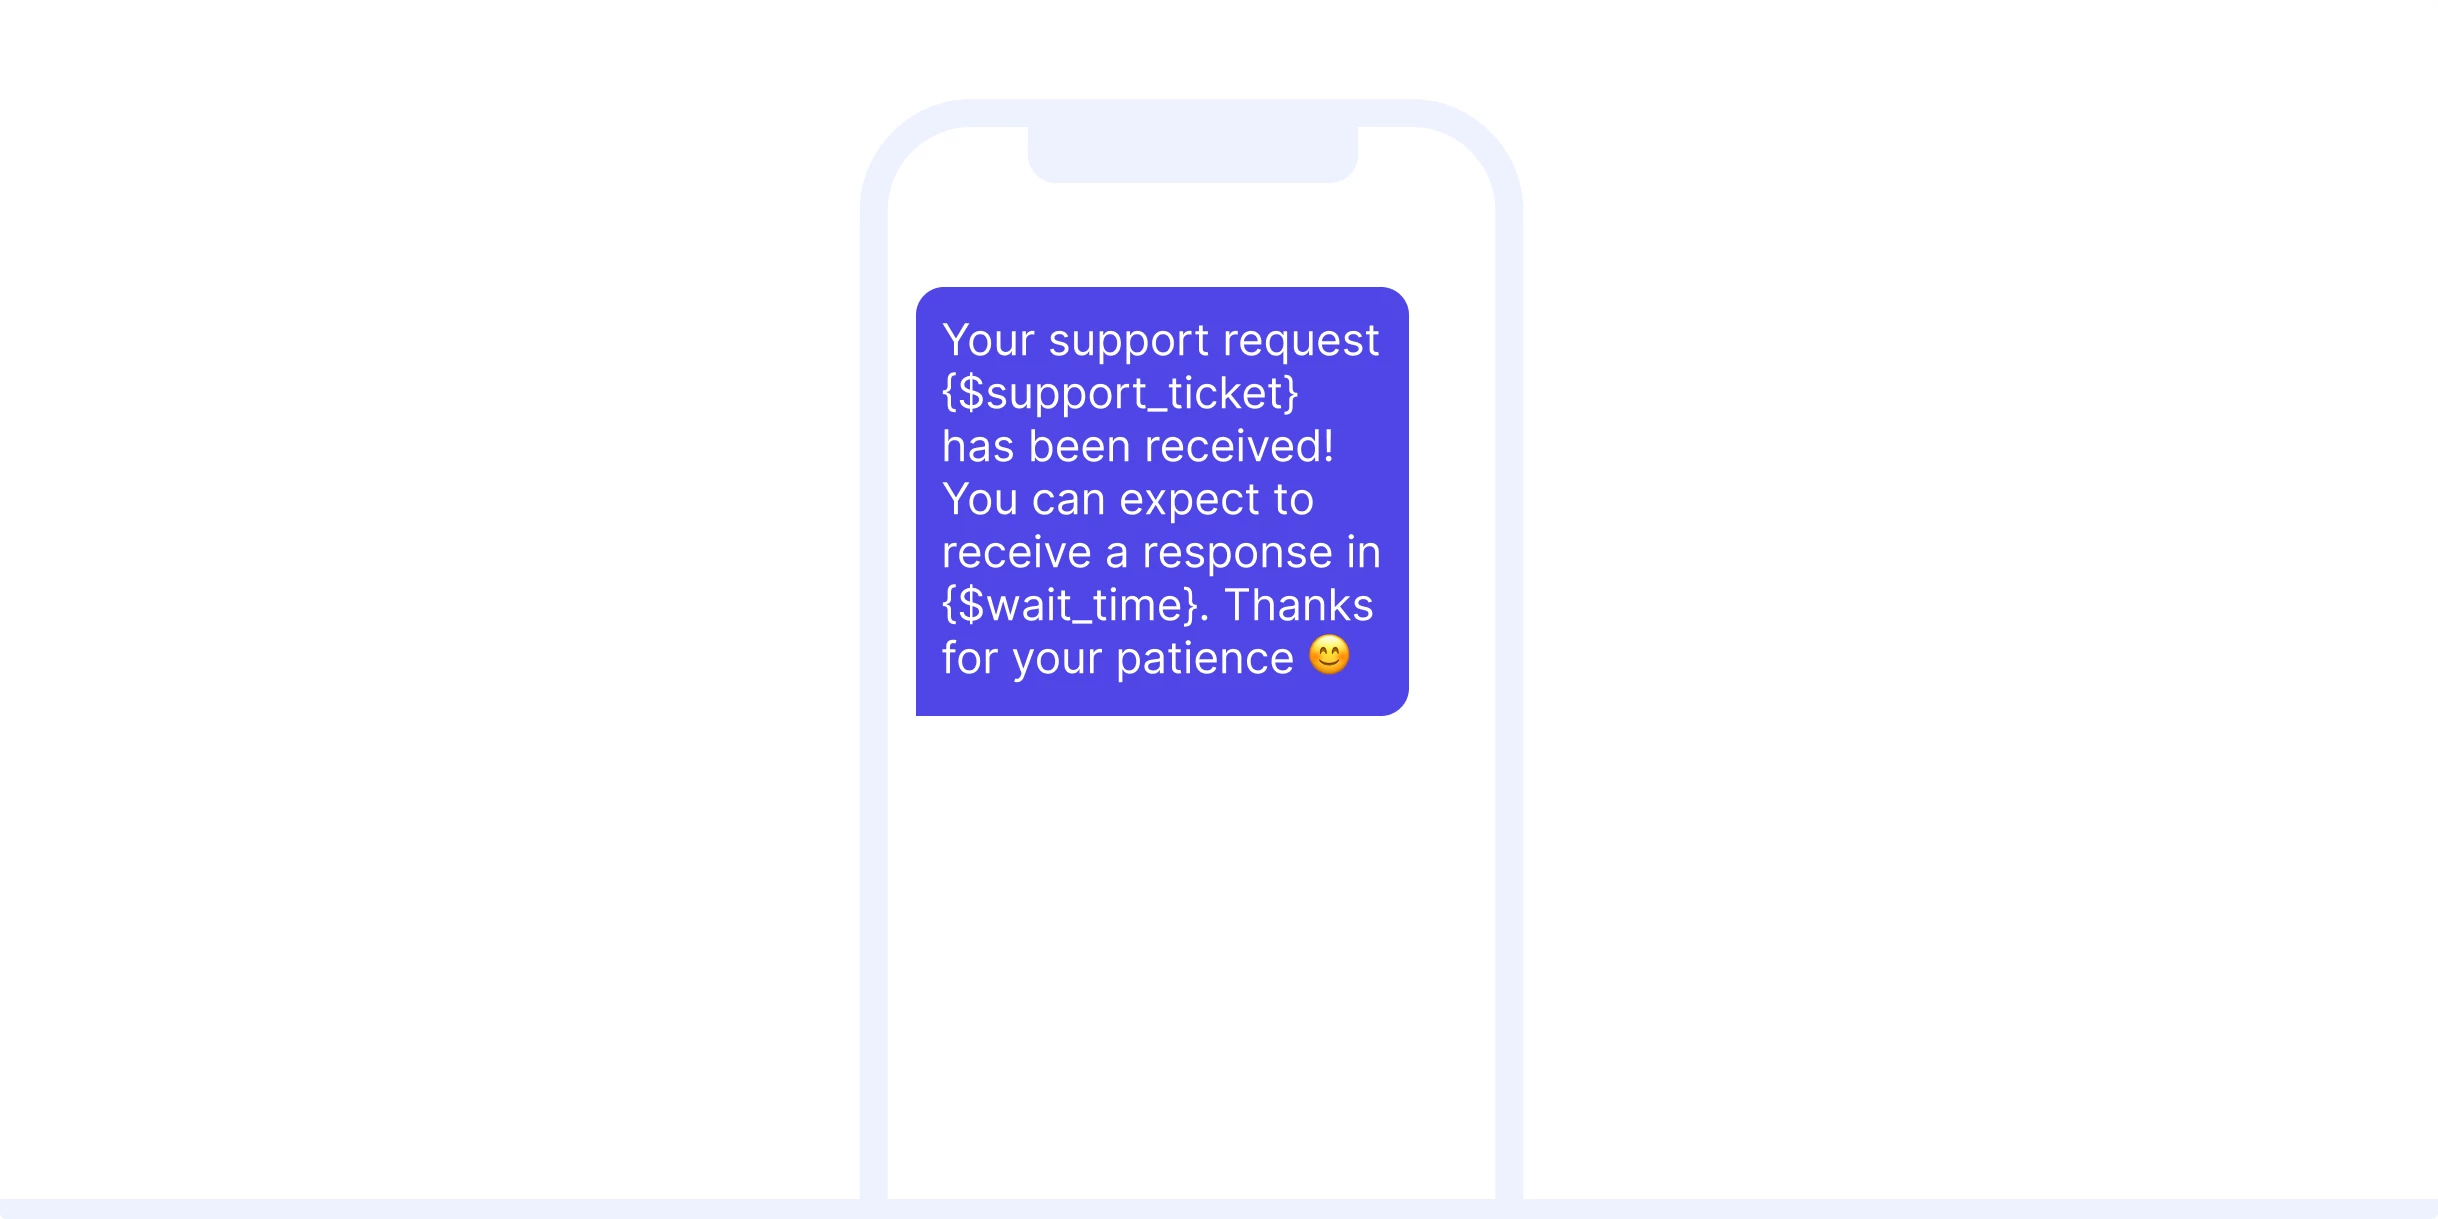 Transactional SMS example for a support request confirmation.